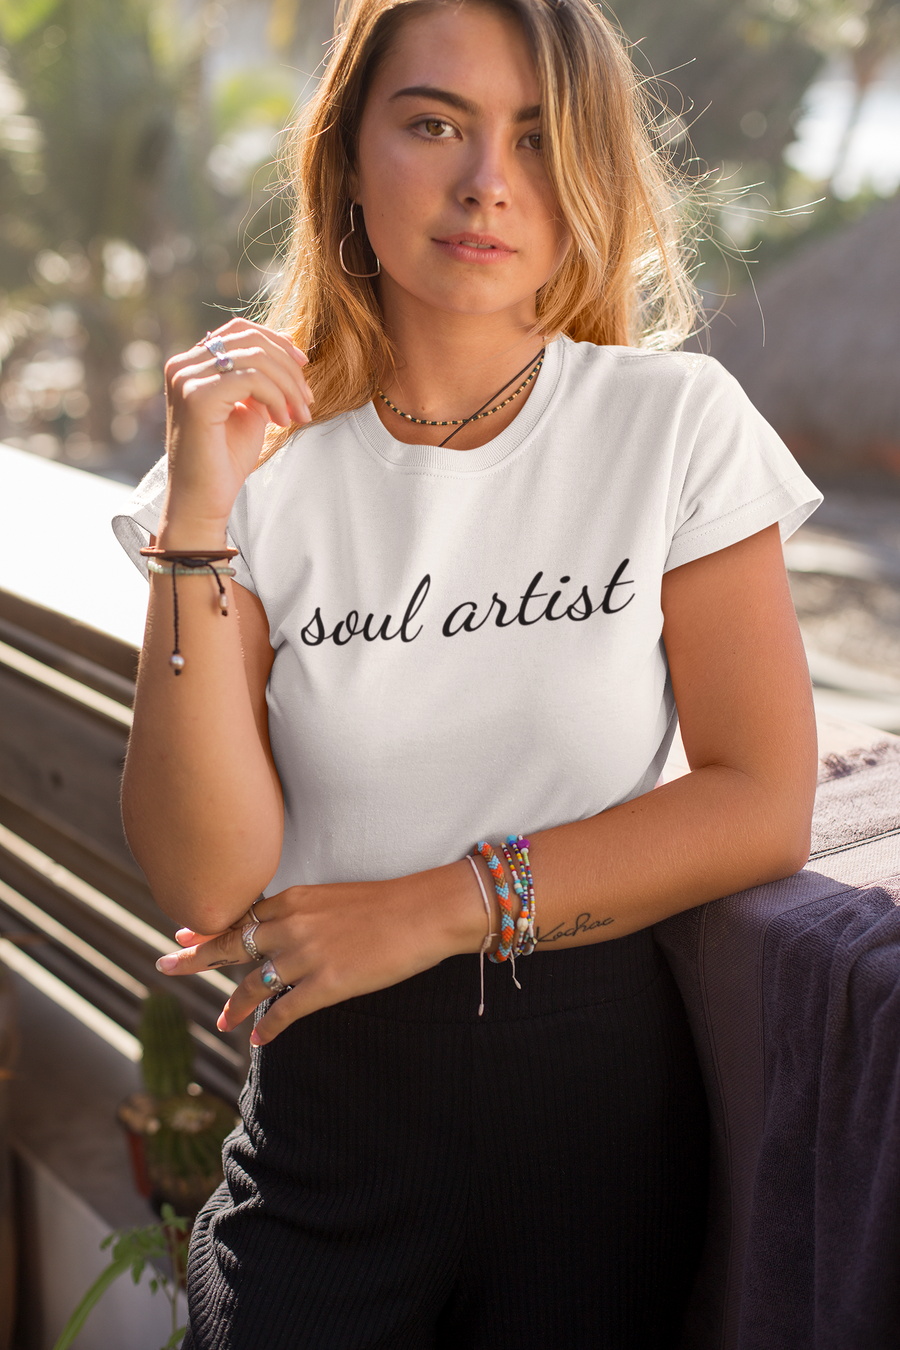 soul artist graphic t shirt black soul artist on white t shirt being worn by young women in tropical setting